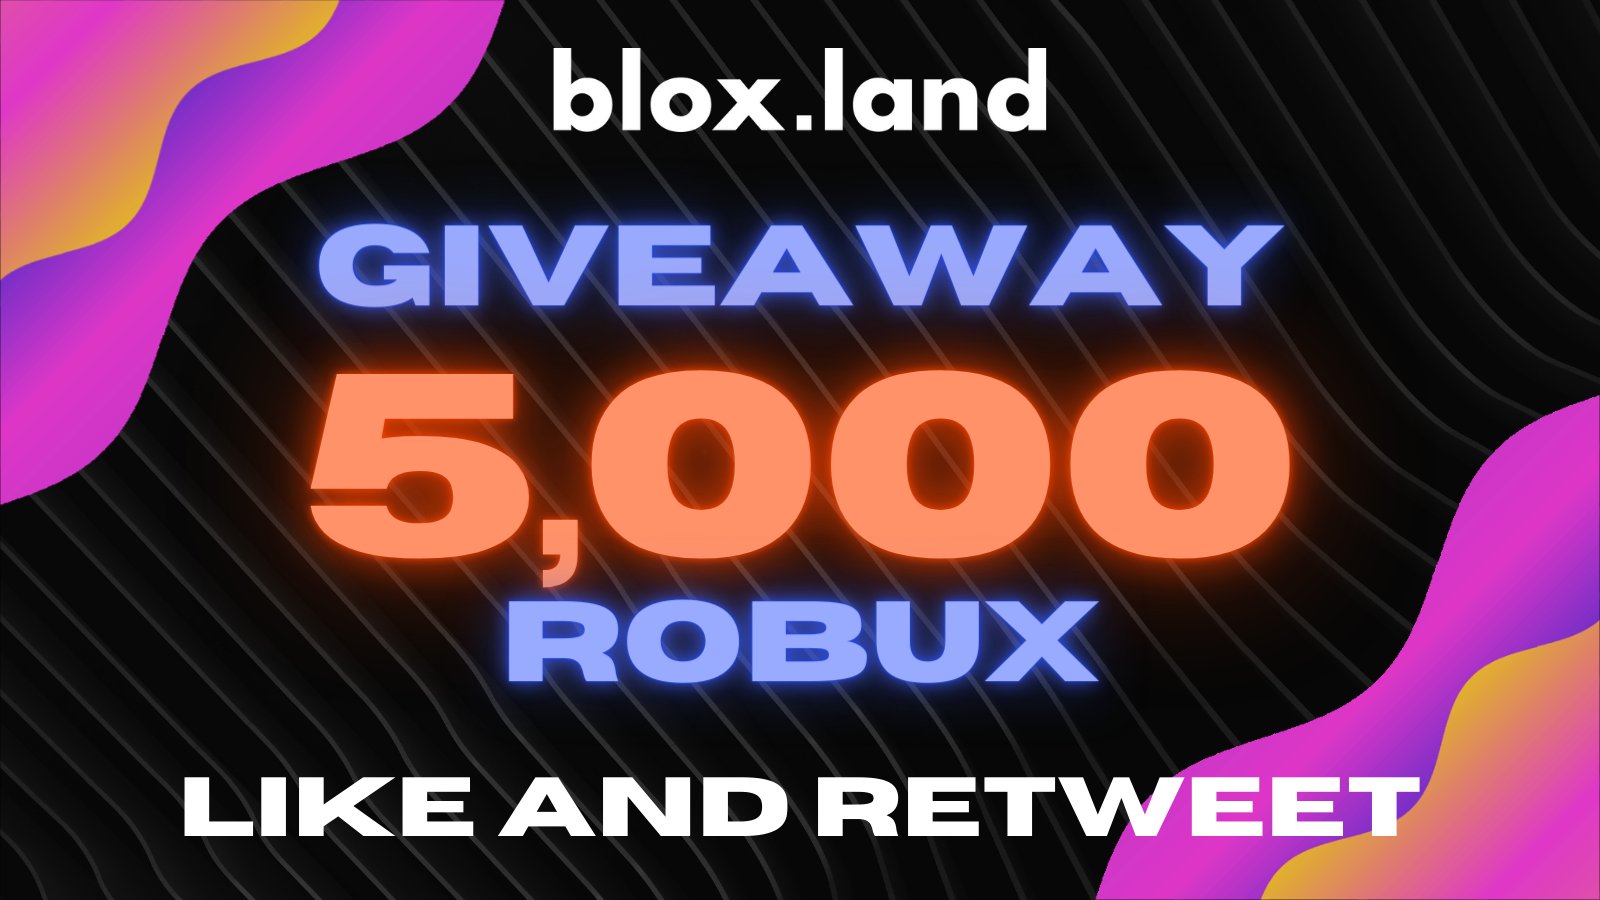 How to get a lot of Robux (Blox.land) 